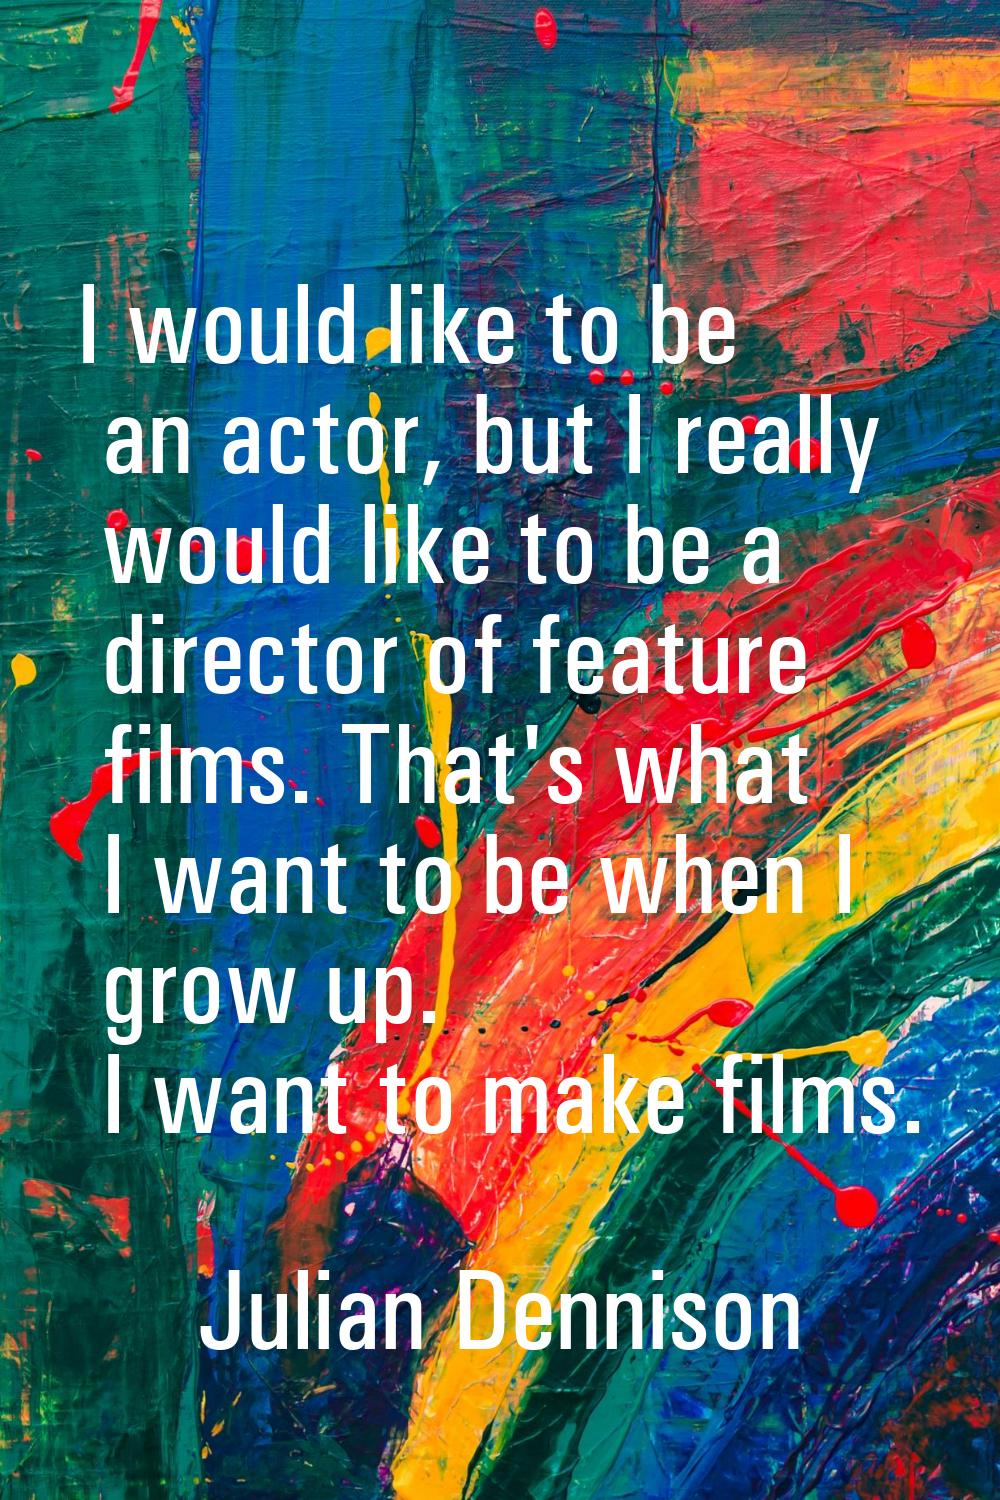 I would like to be an actor, but I really would like to be a director of feature films. That's what